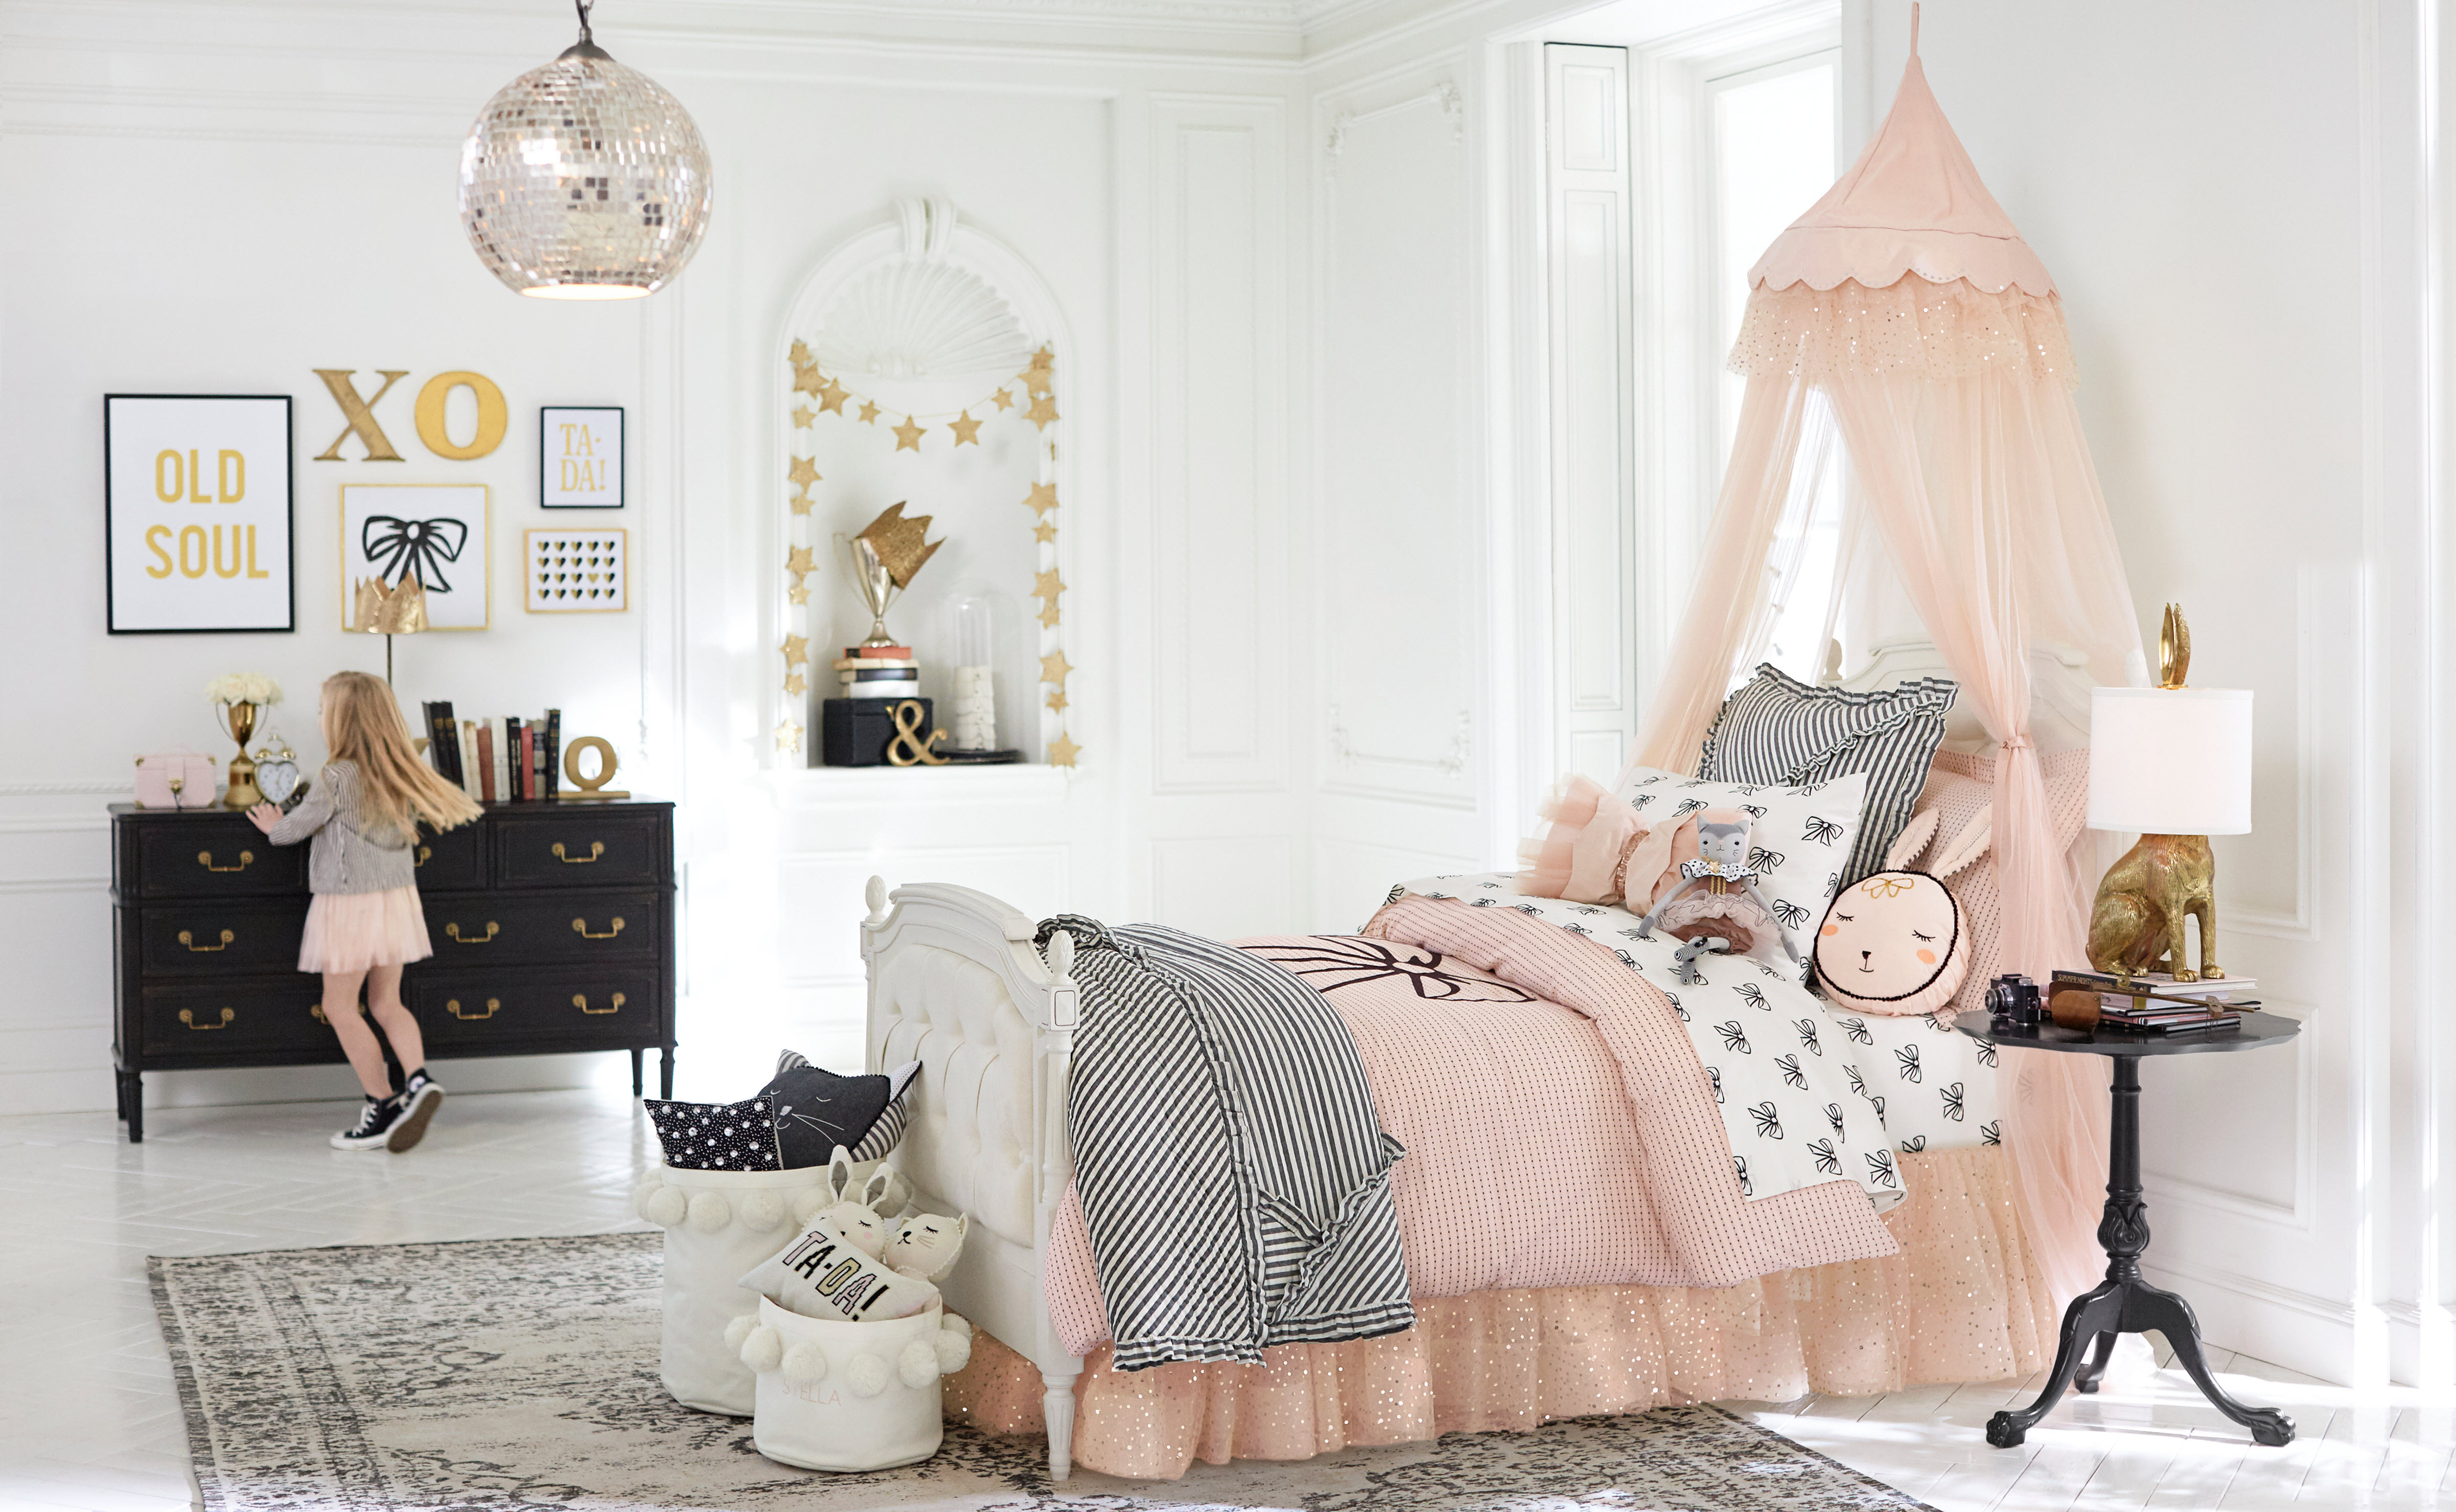 POTTERY BARN KIDS UNVEILS IMAGINATIVE NEW COLLECTION WITH FASHION